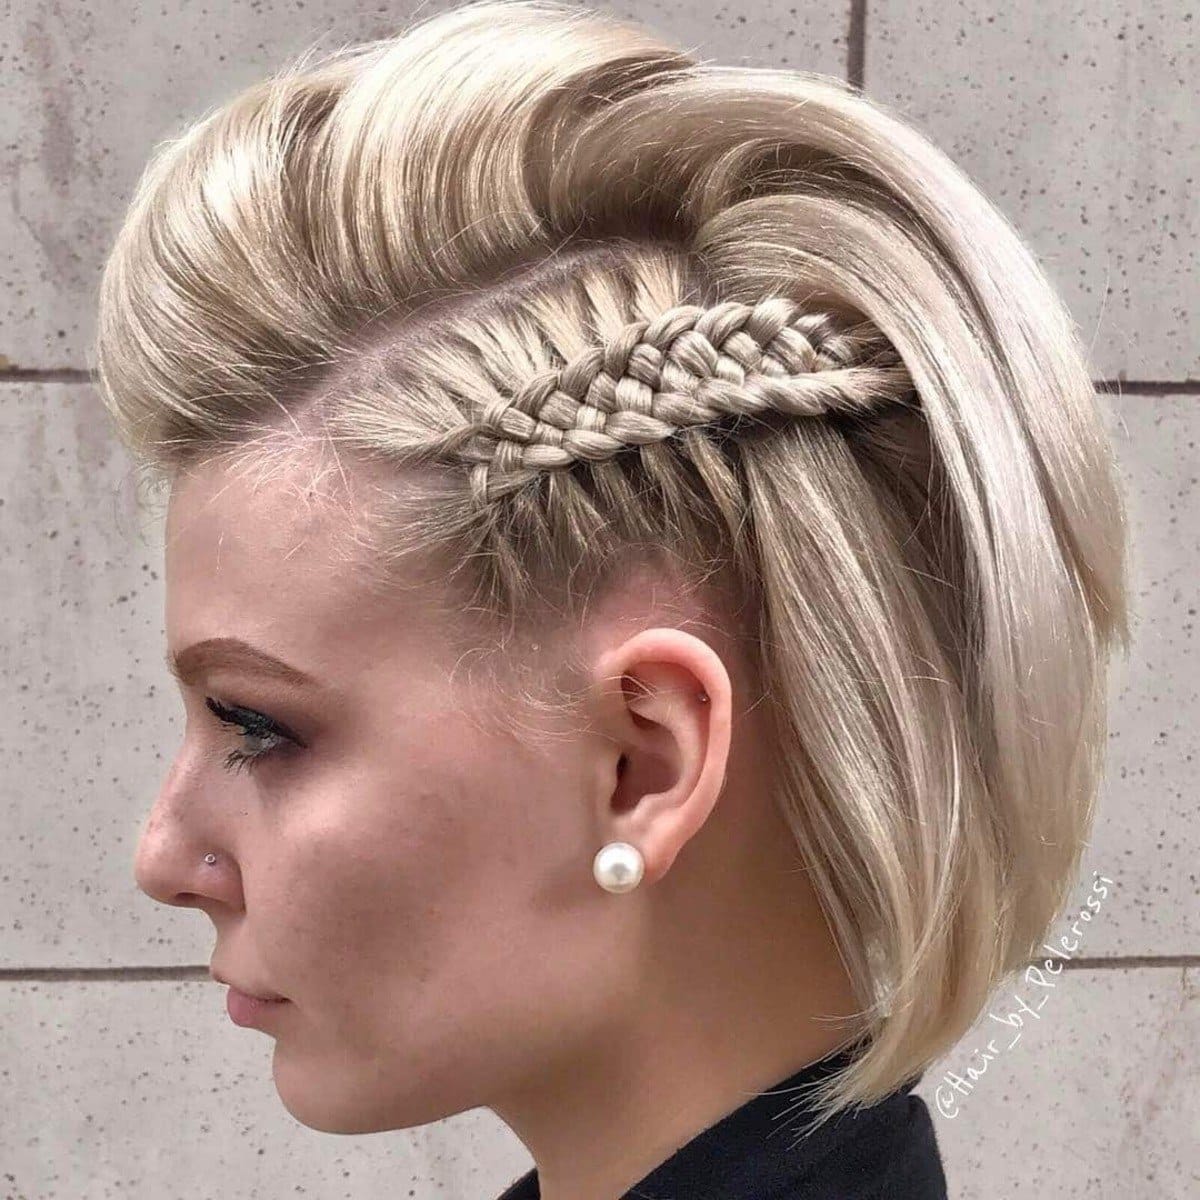 17 Cutest & Easiest Side Braid Hairstyles for Every Hair Length